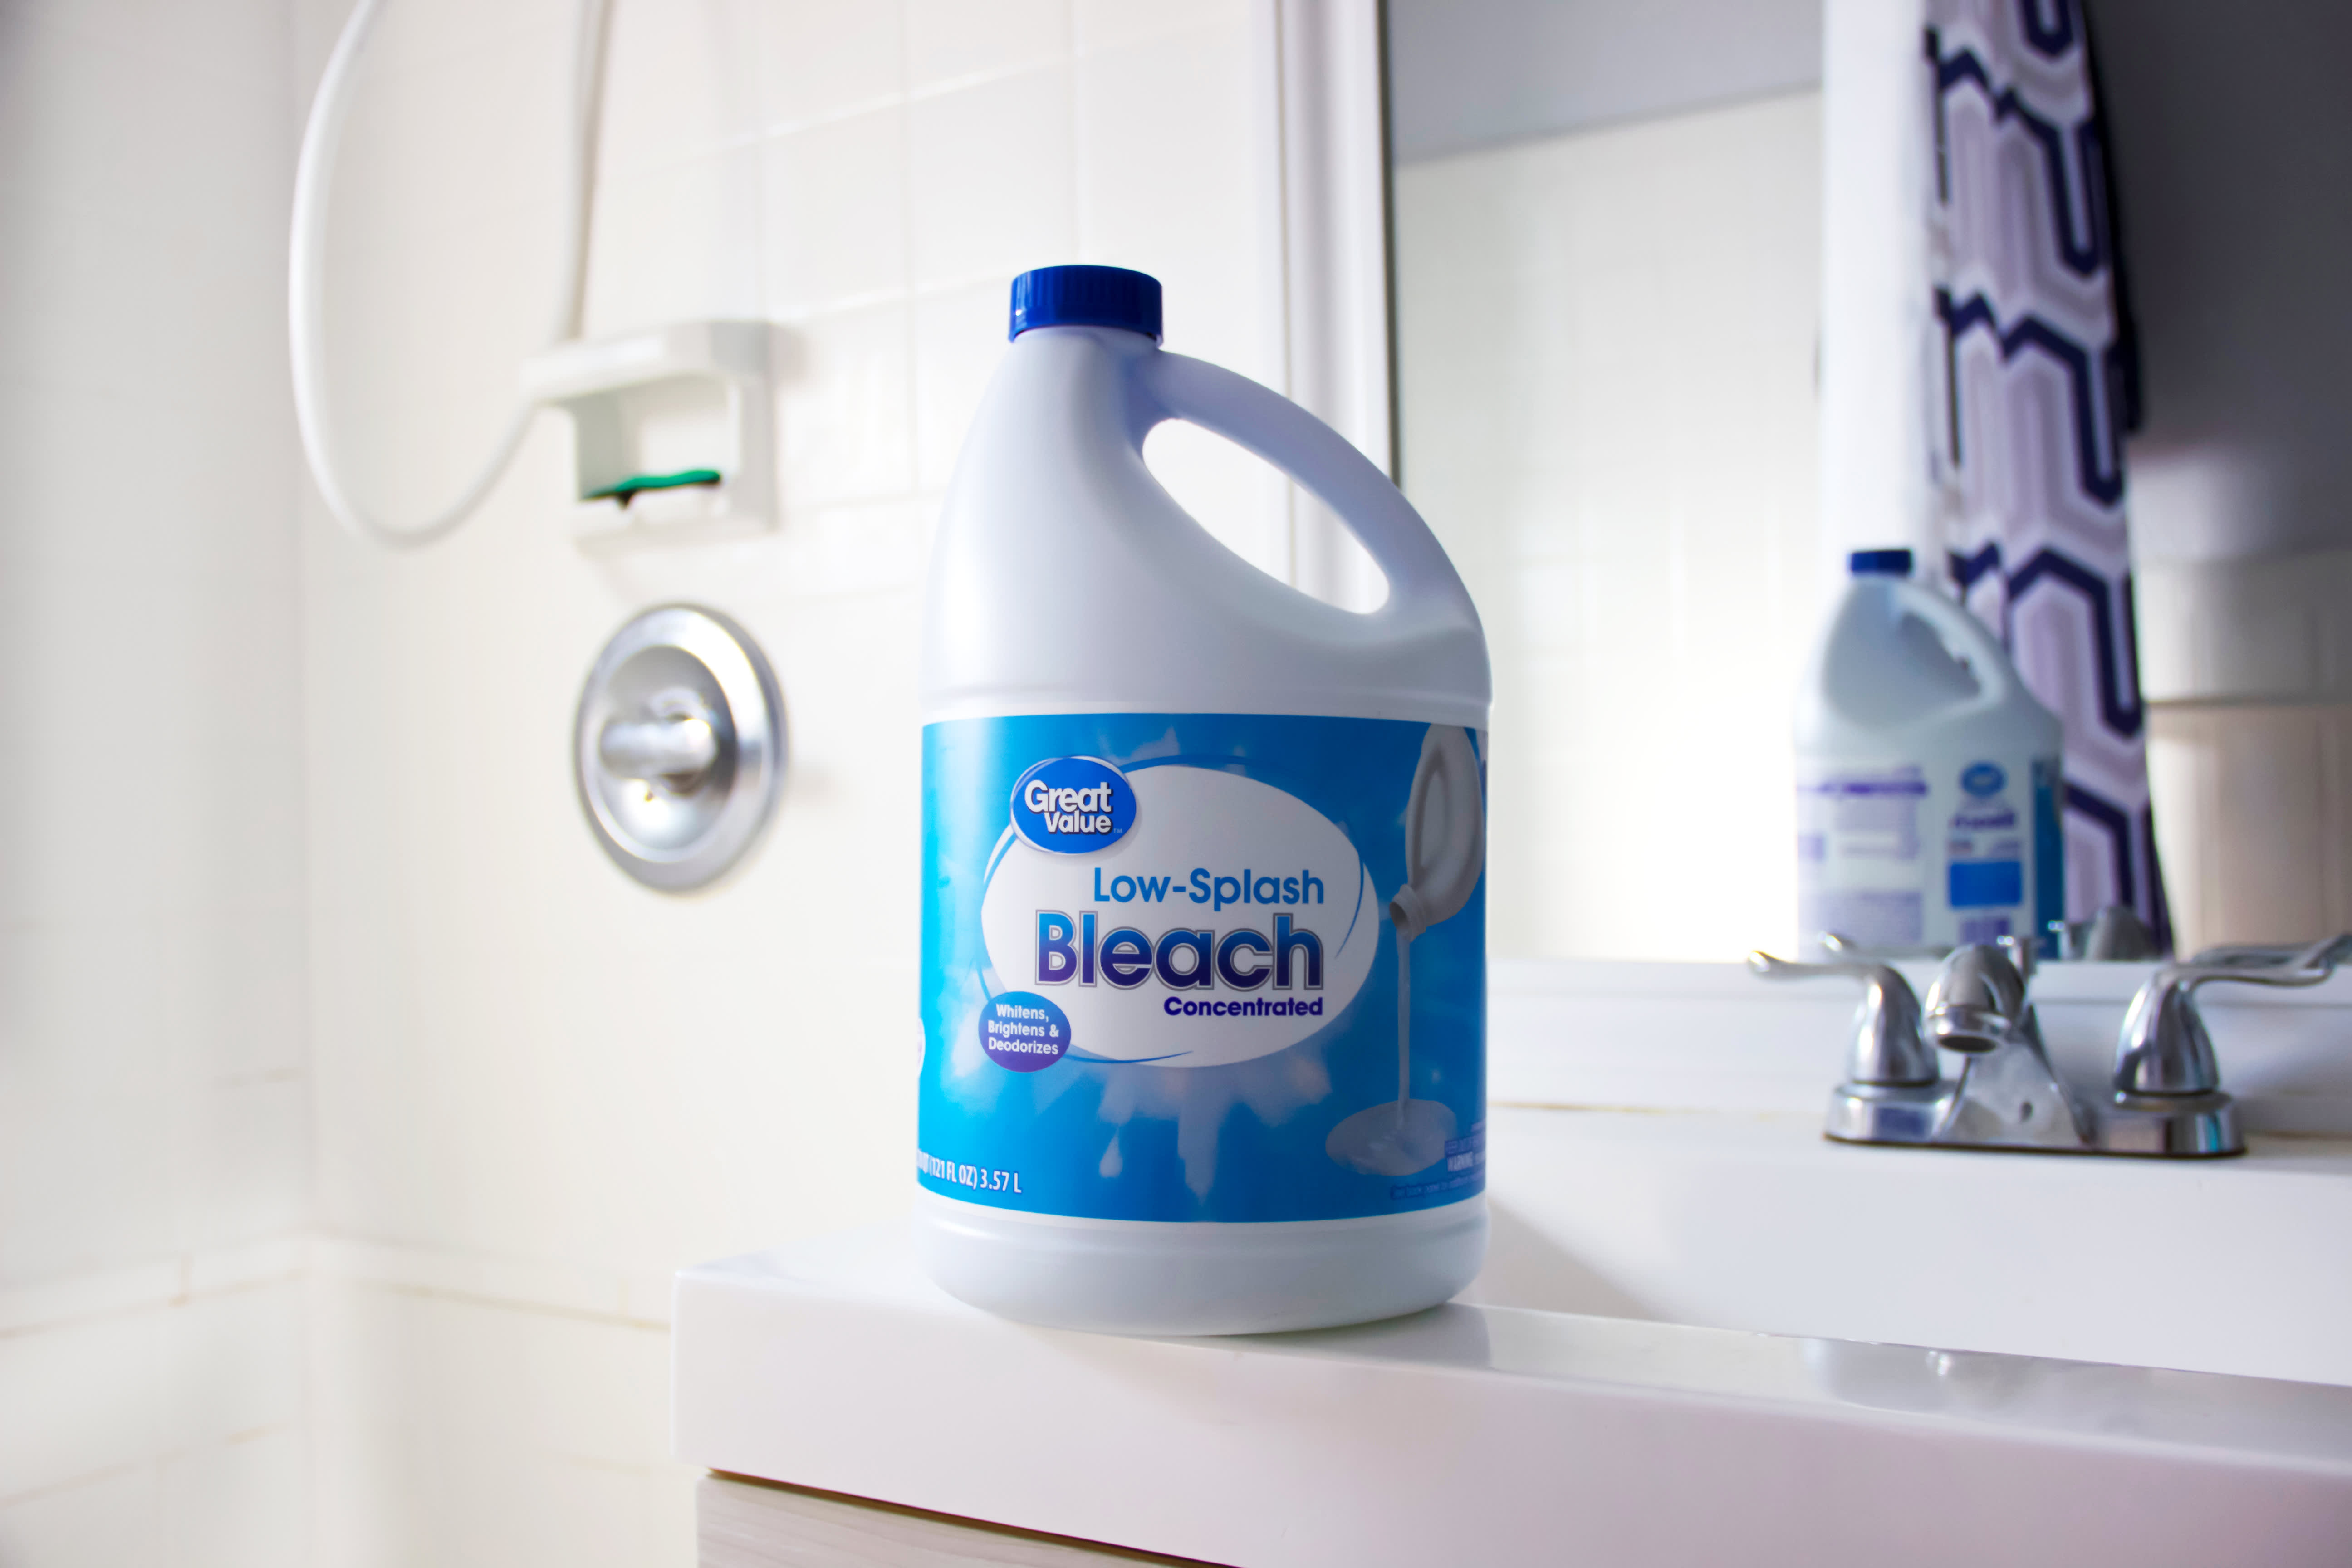 How to Make Your Own Disinfectant Bleach Solution